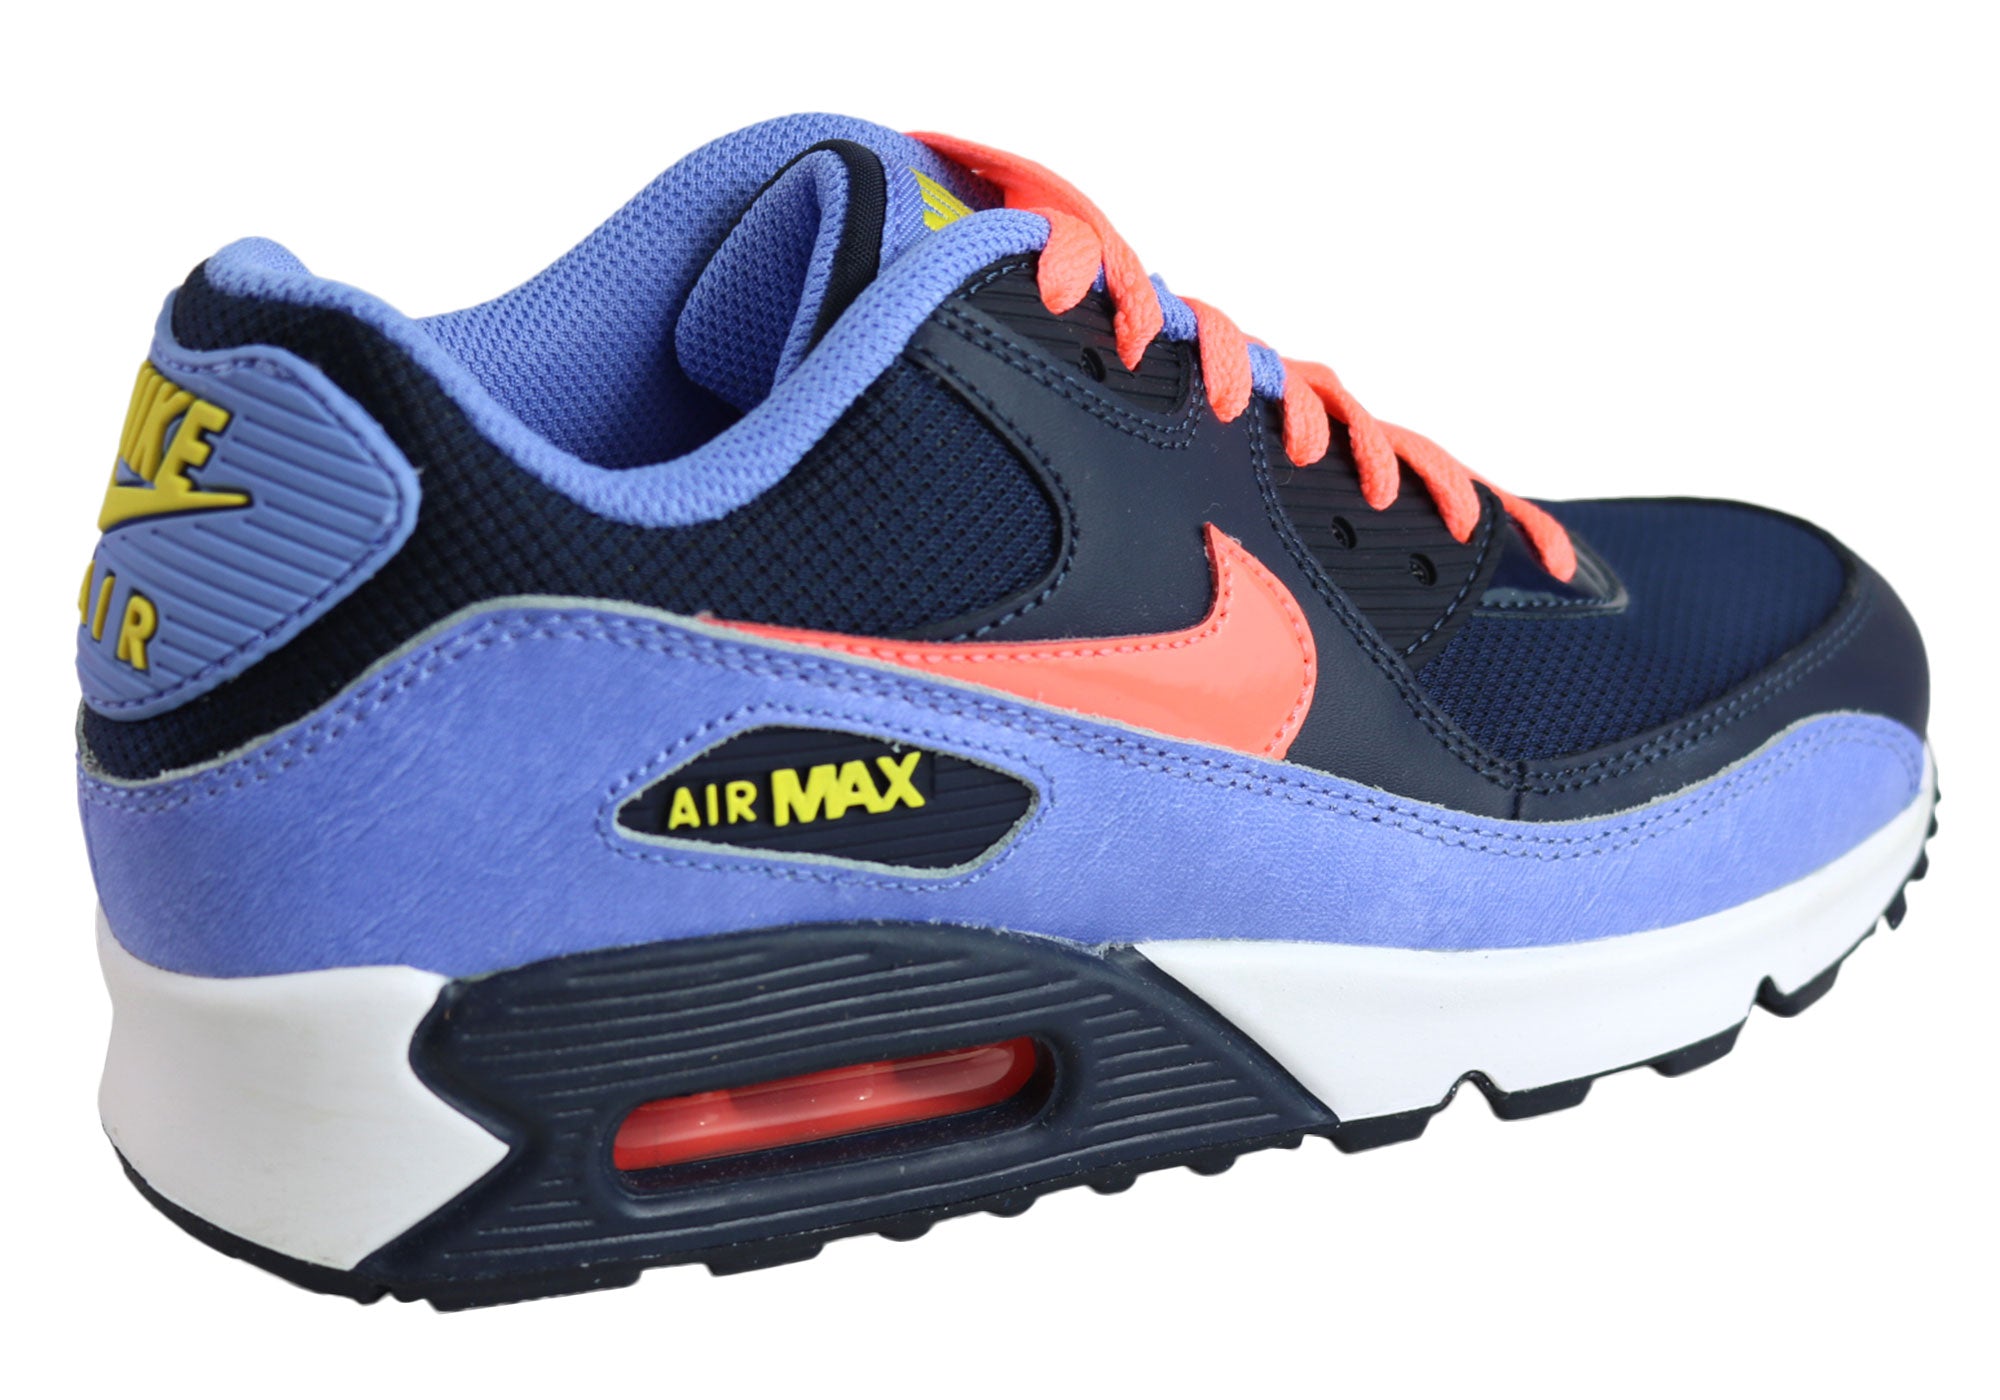 Nike Air Max 90 (GS) Older Kids Girls Trainers Sport Shoes Brand